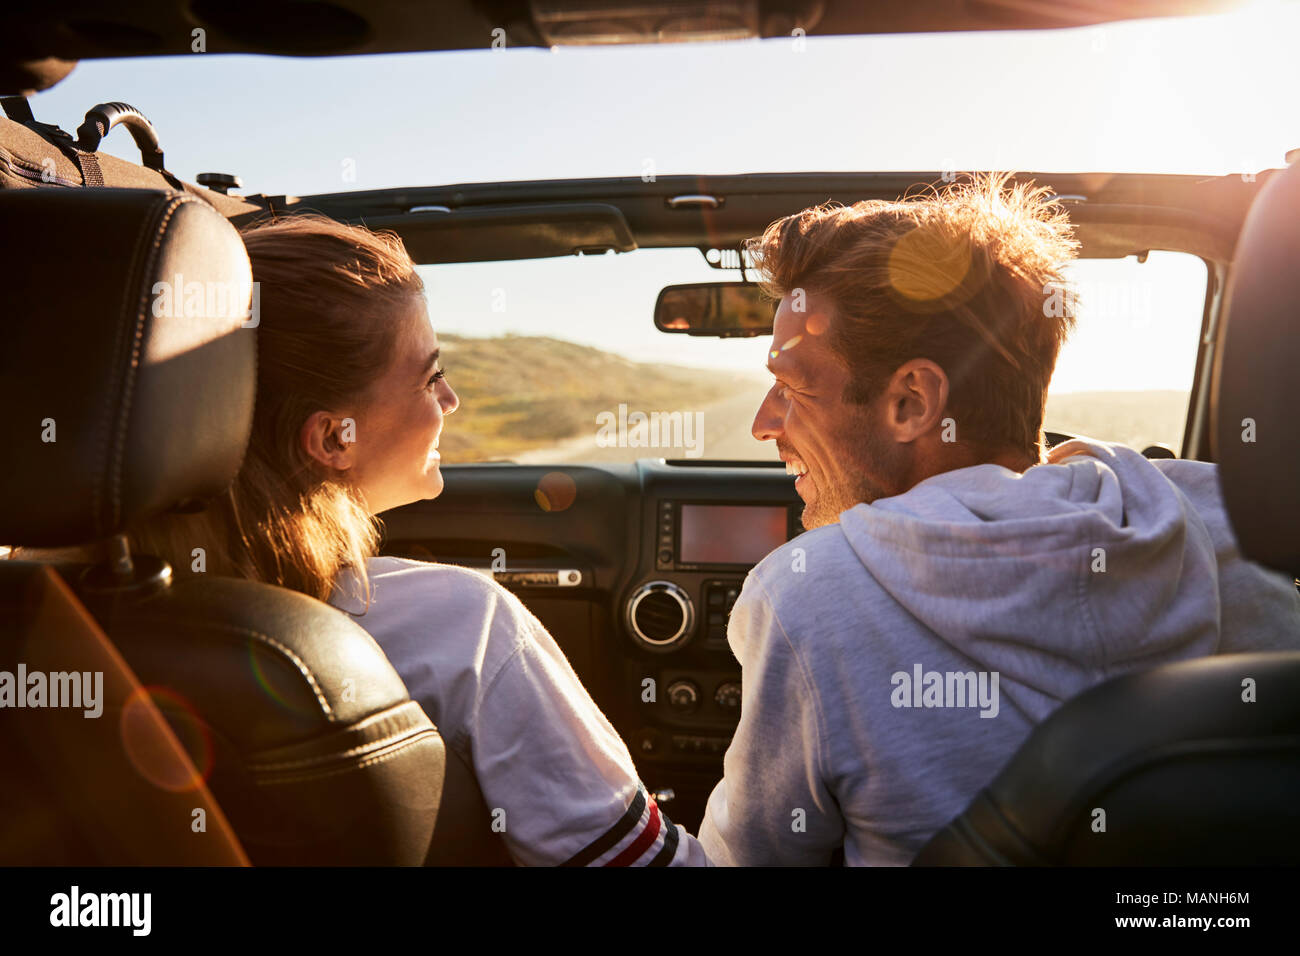 Couple look at each other while driving, rear passenger POV Stock Photo